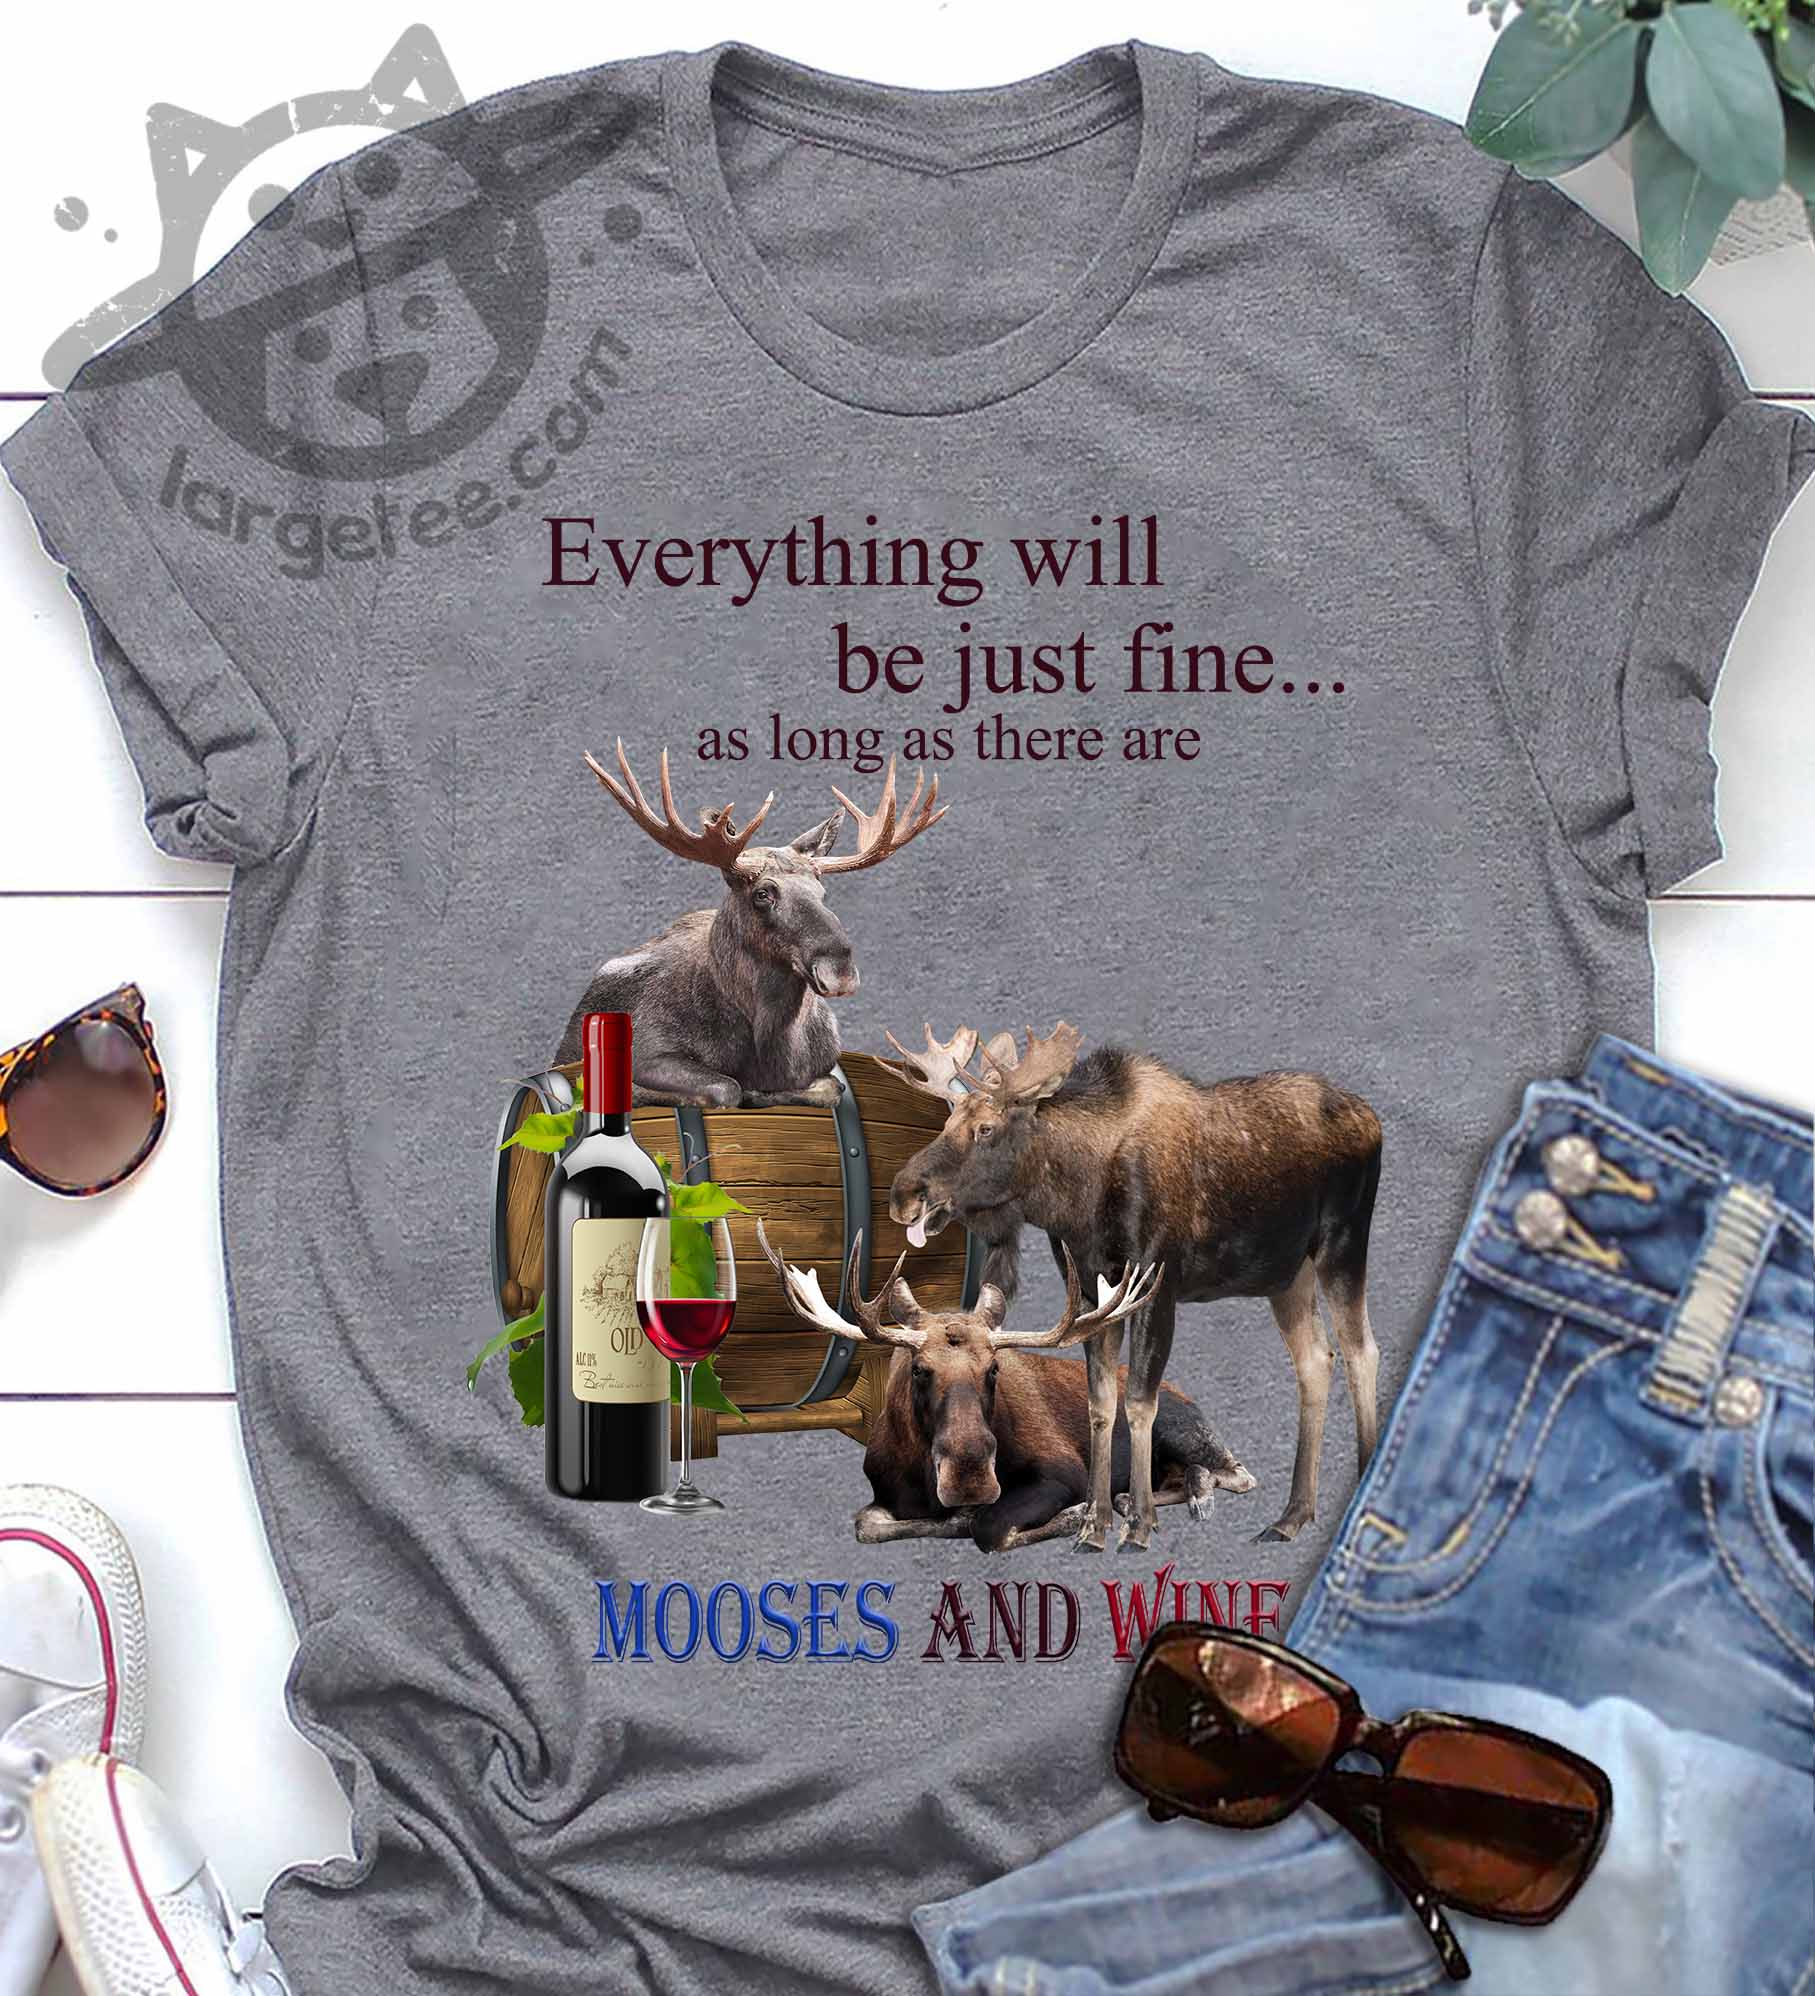 Everything will be just fine as long as there mooses and wine - T-shirt for wine lover